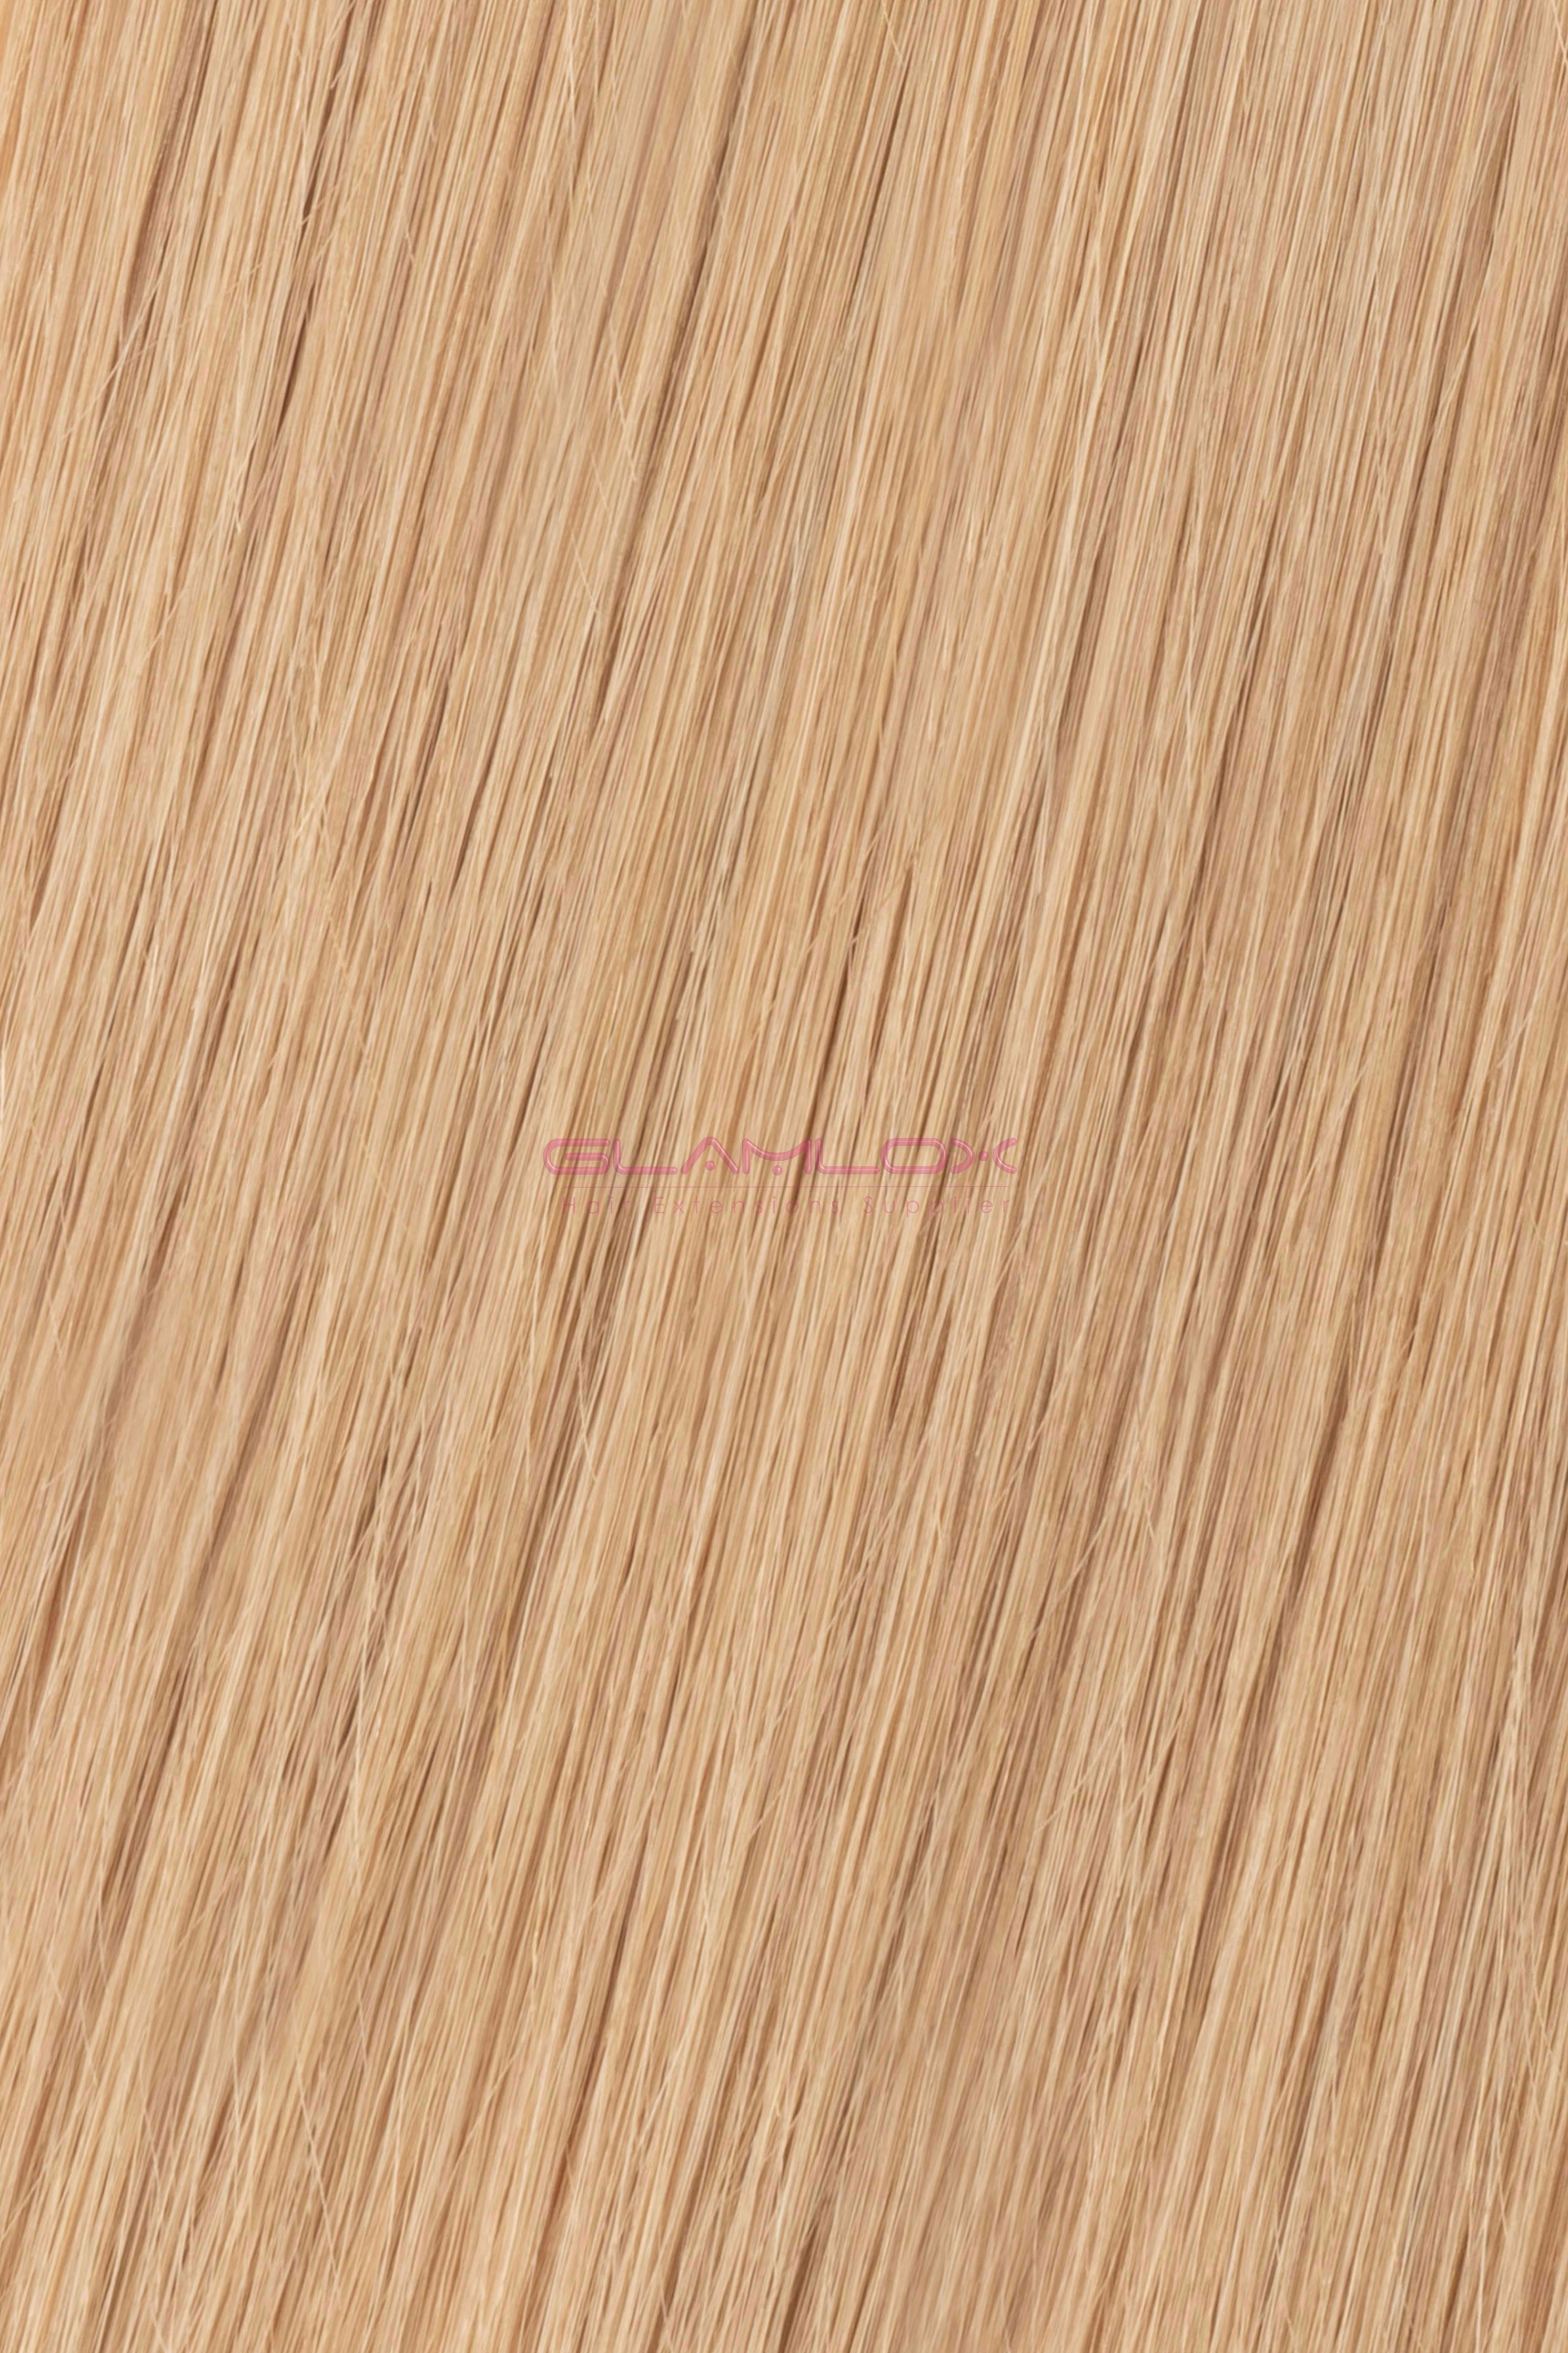 18" - Tape In Hair Extensions - Russian Mongolian Double Drawn Remy Human Hair Extensions